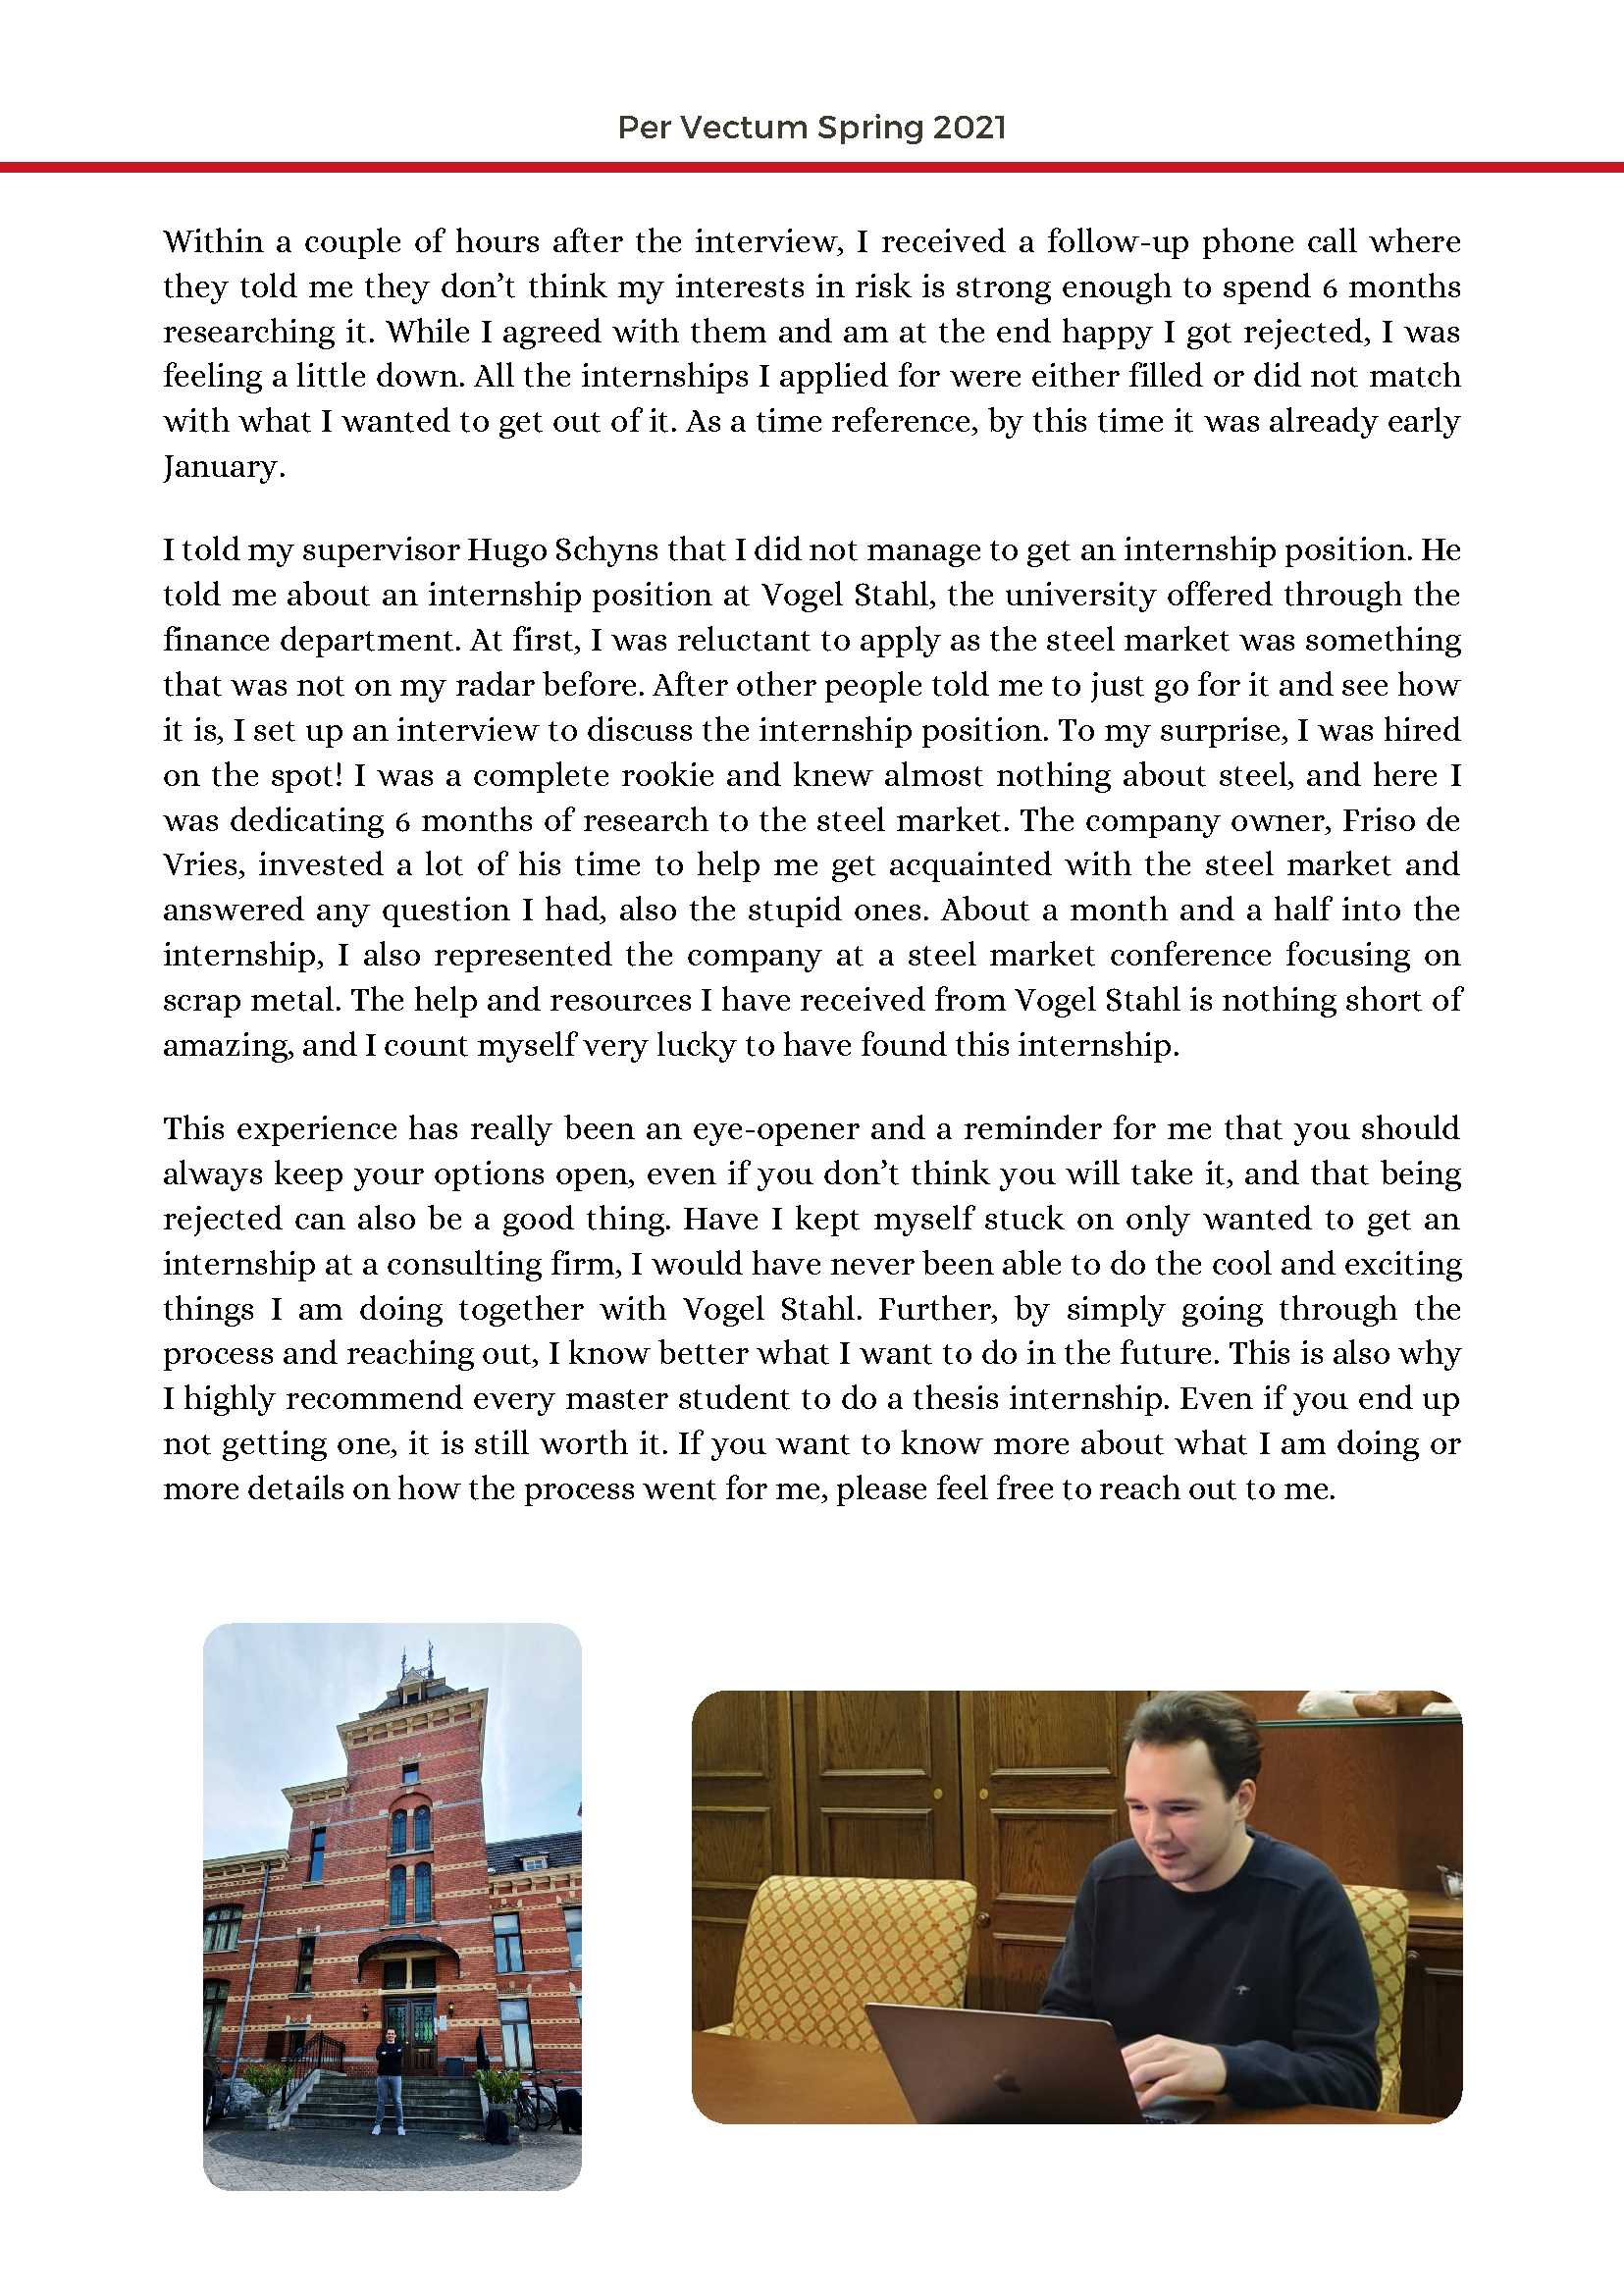 Per Vectum Spring edition 2021 (1)_Page_16.png